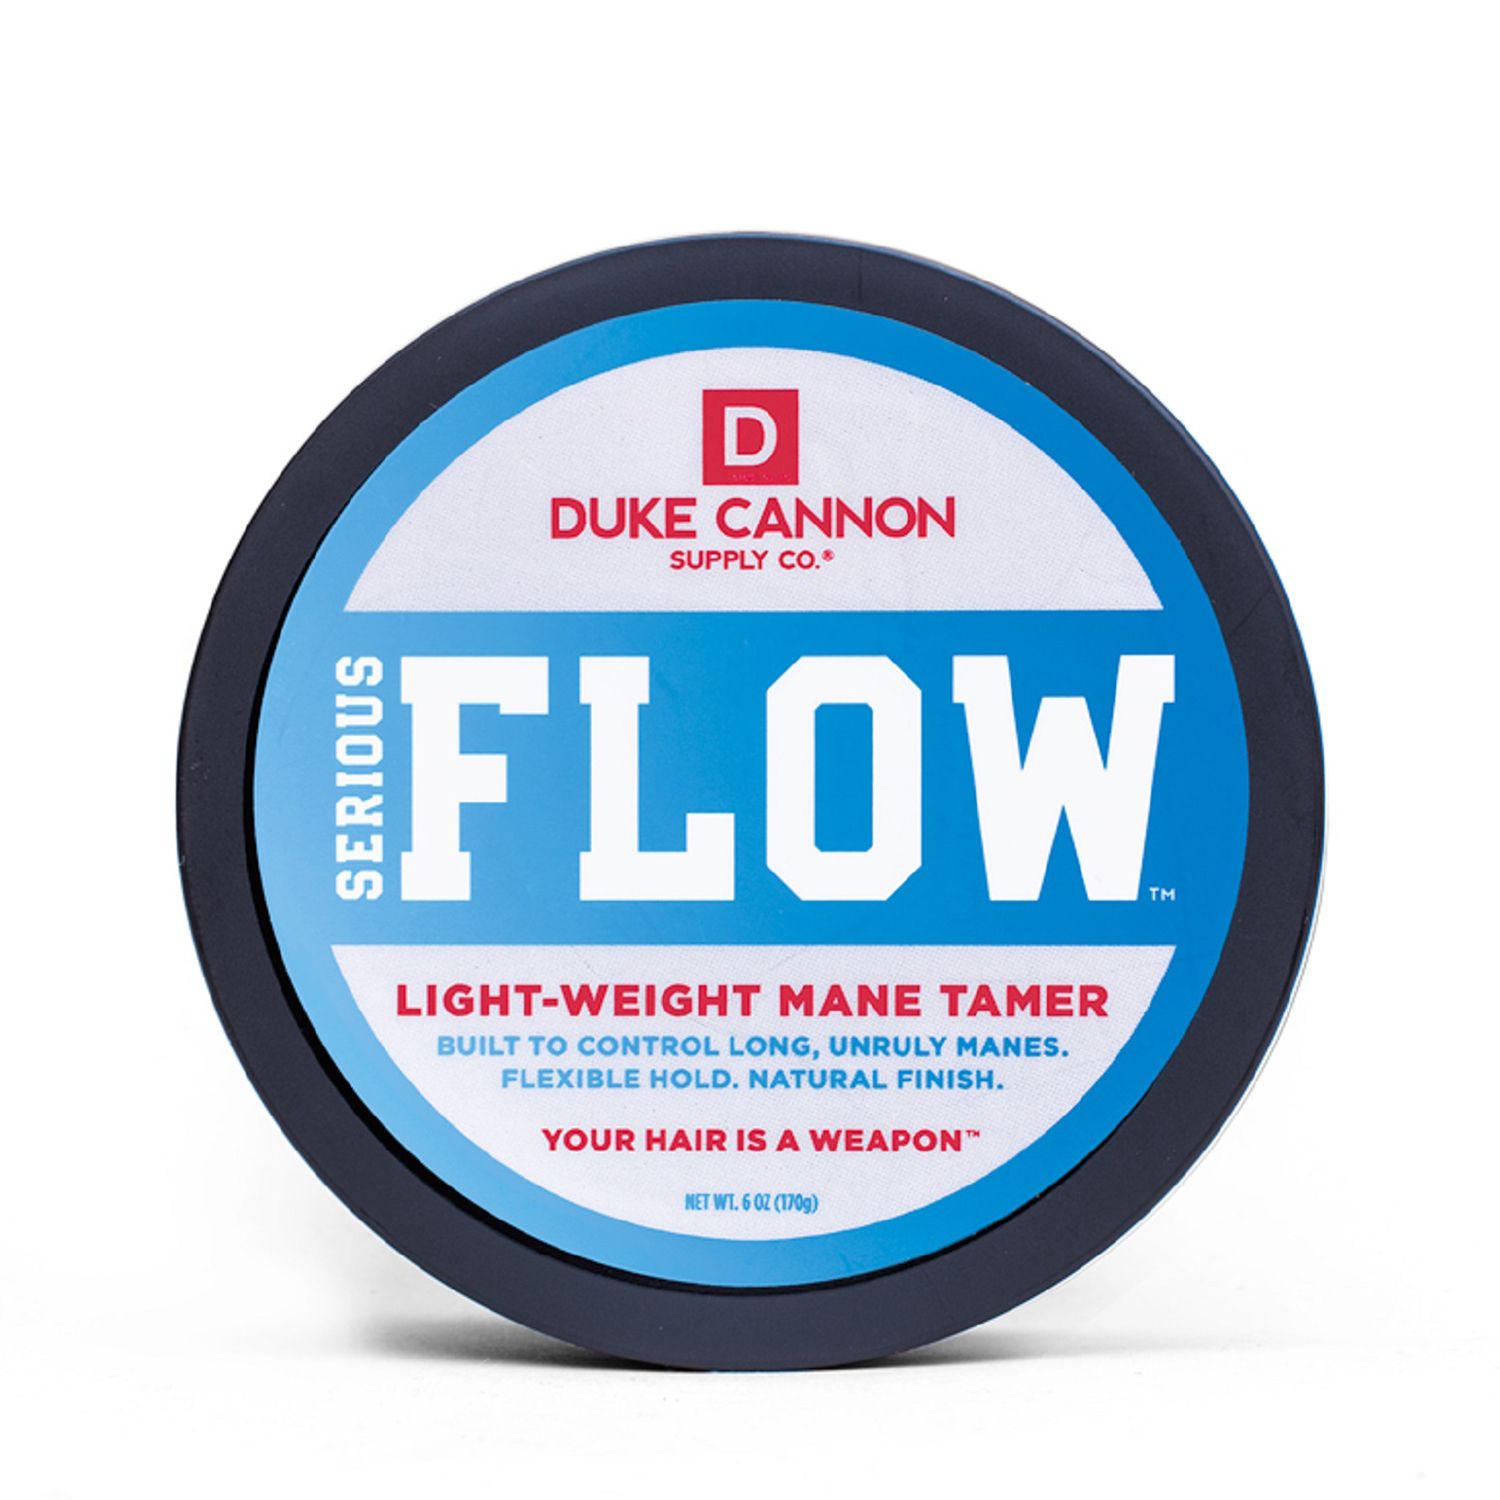 Image for Duke Cannon Supply Co. Serious Flow Styling Putty - The Mane Tamer at Kohl's.